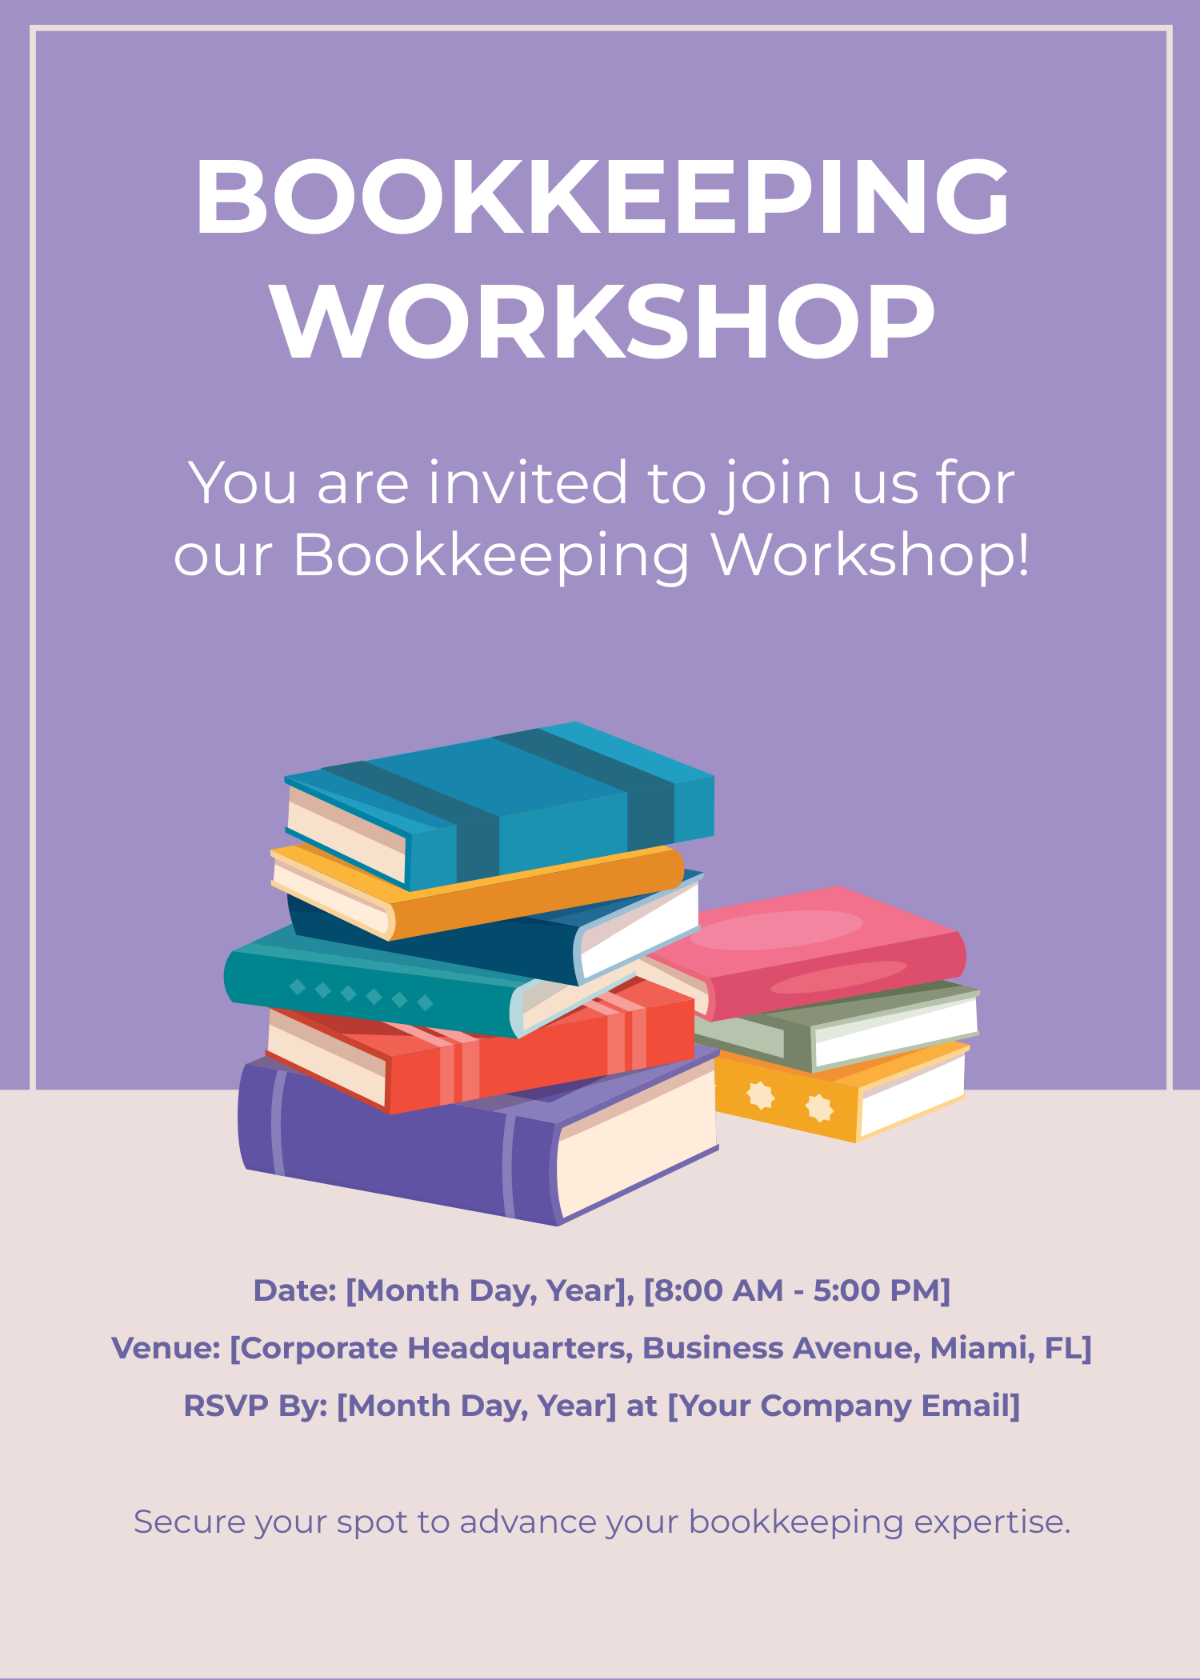 Bookkeeping Workshop Participant Invitation Card